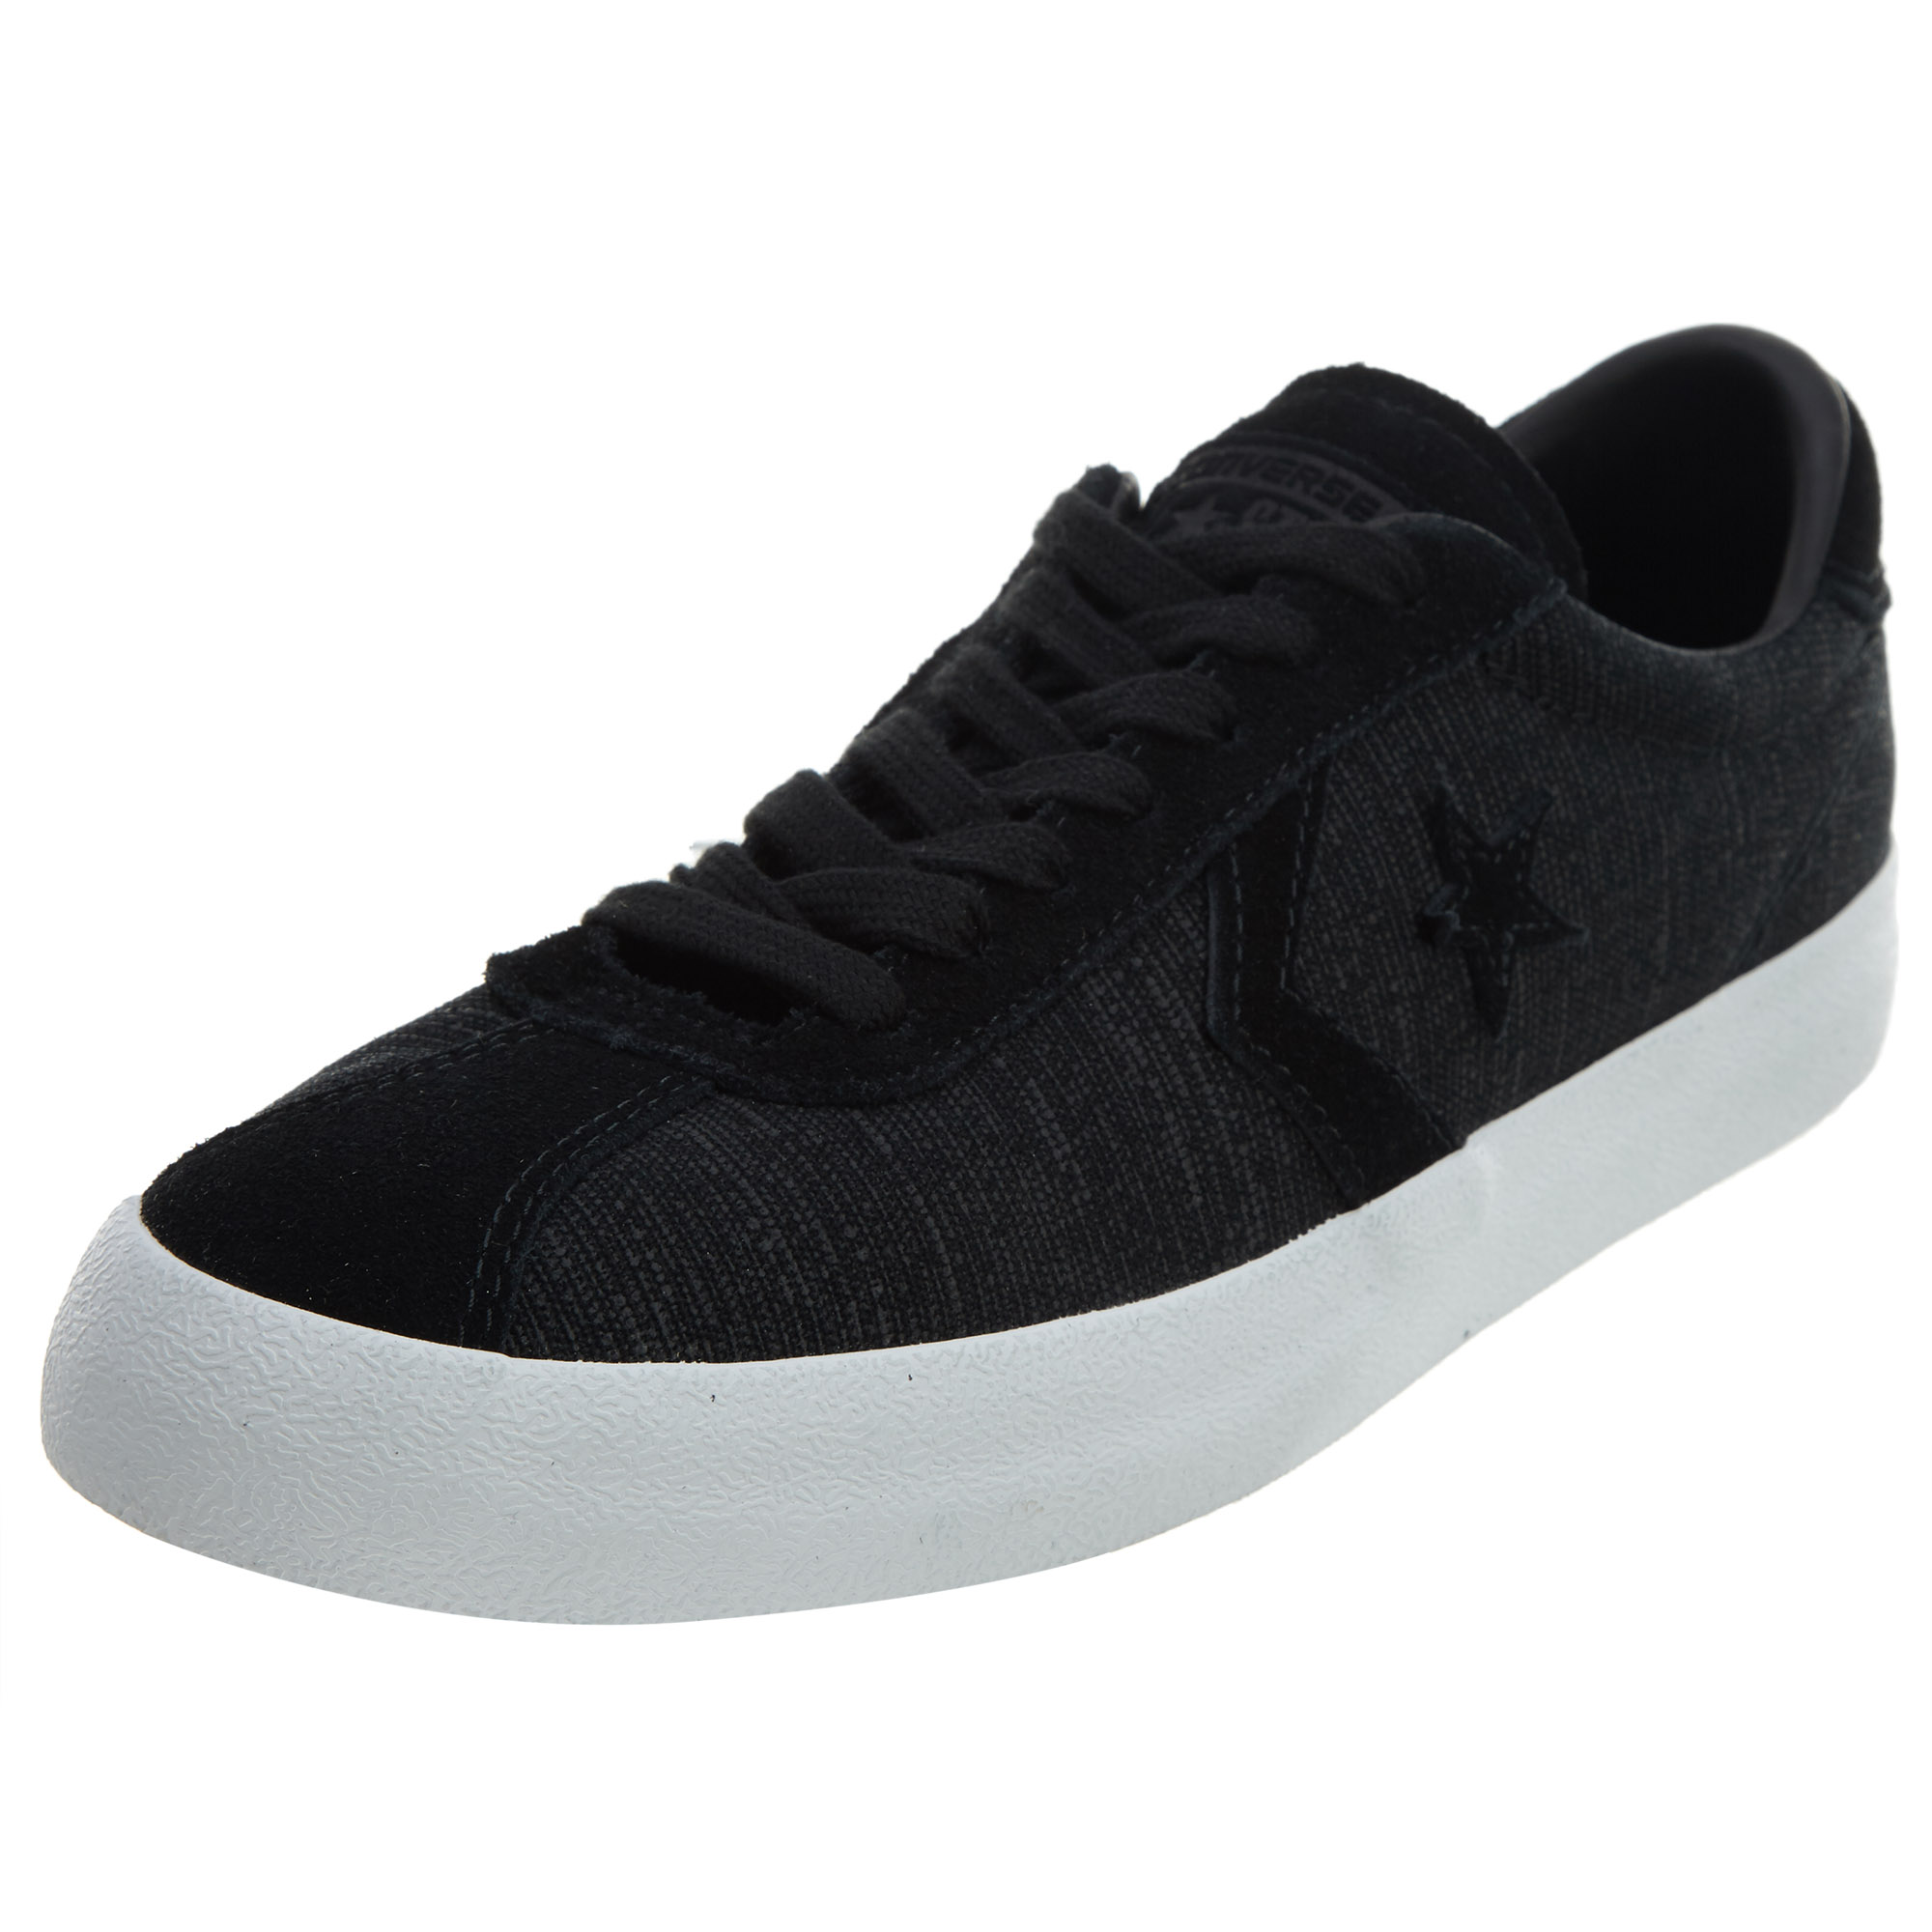 Converse Breakpoint Oxford Unisex Style : 155581c - image 1 of 7